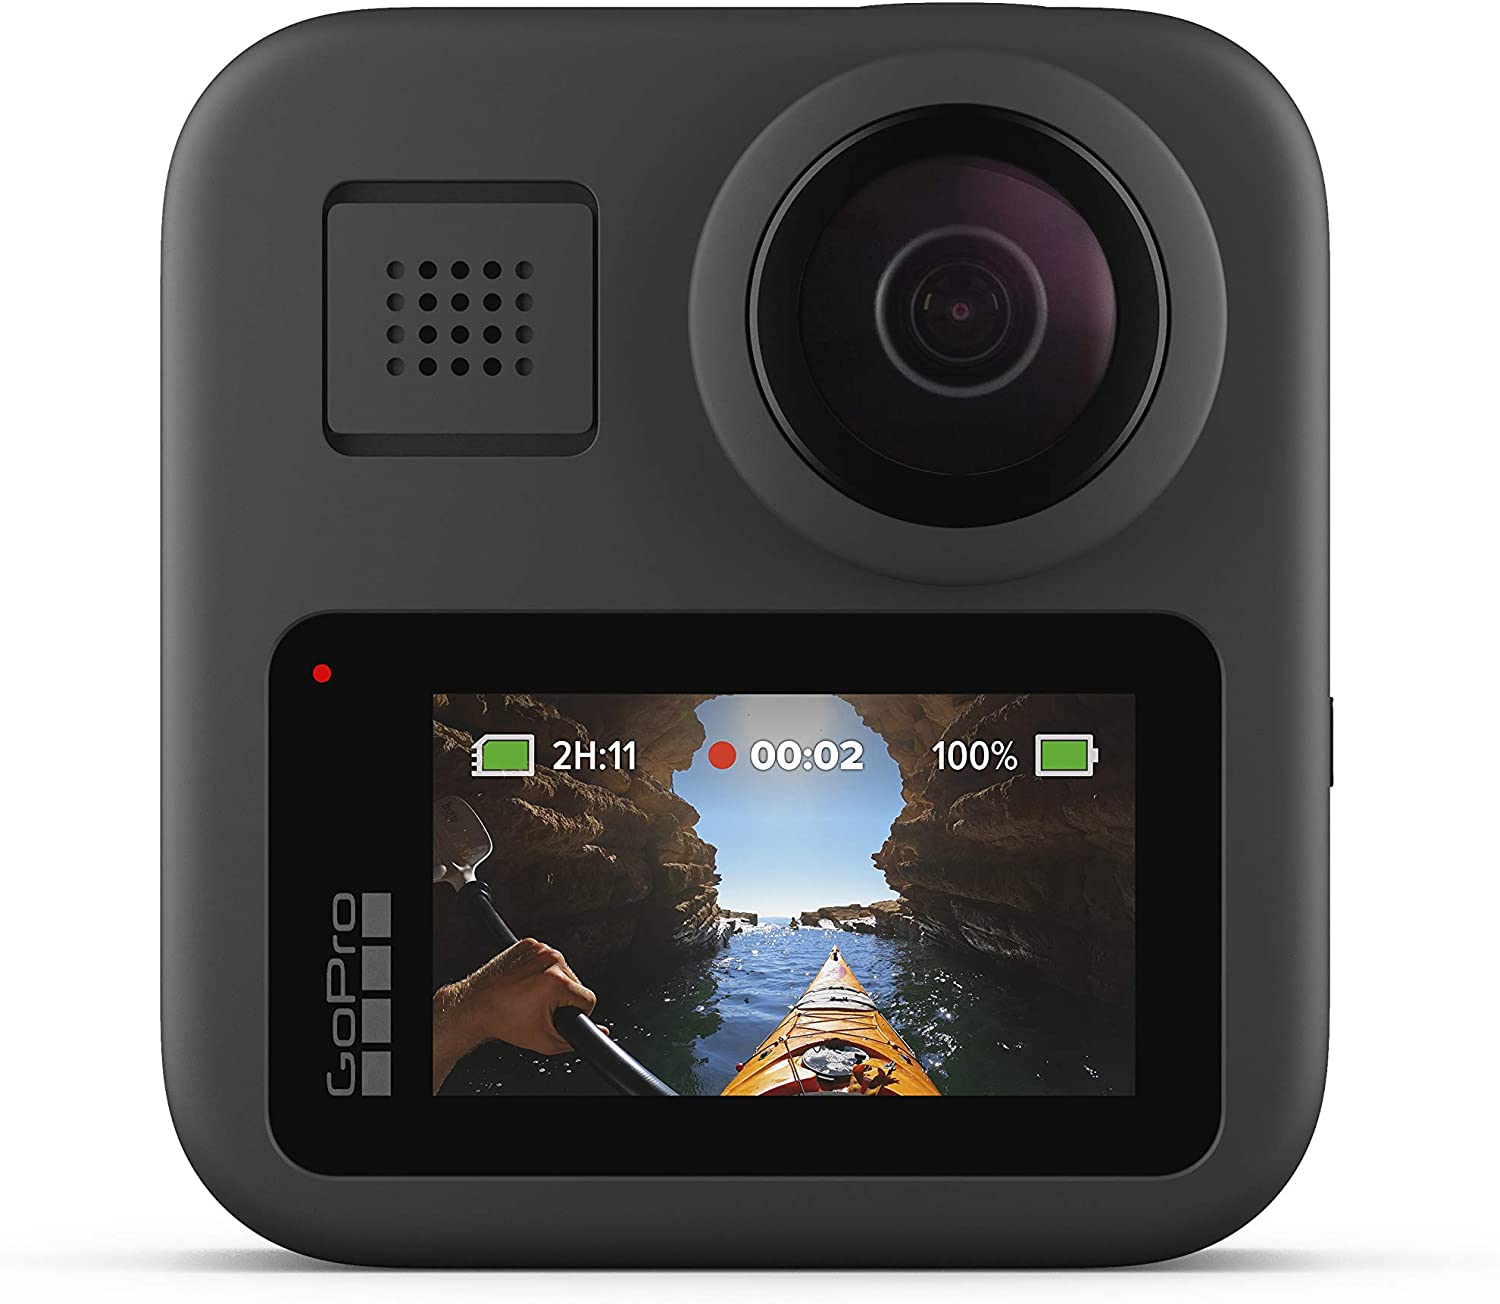 Gopro Max Waterproof 360 Traditional Camera With Touch Screen Spherical 5 6k30 Hd Video 16 6mp 360 Photos 1080p Live Streaming Stabilization The Gopro Max Is A 360 Degree Camera And Successor To The